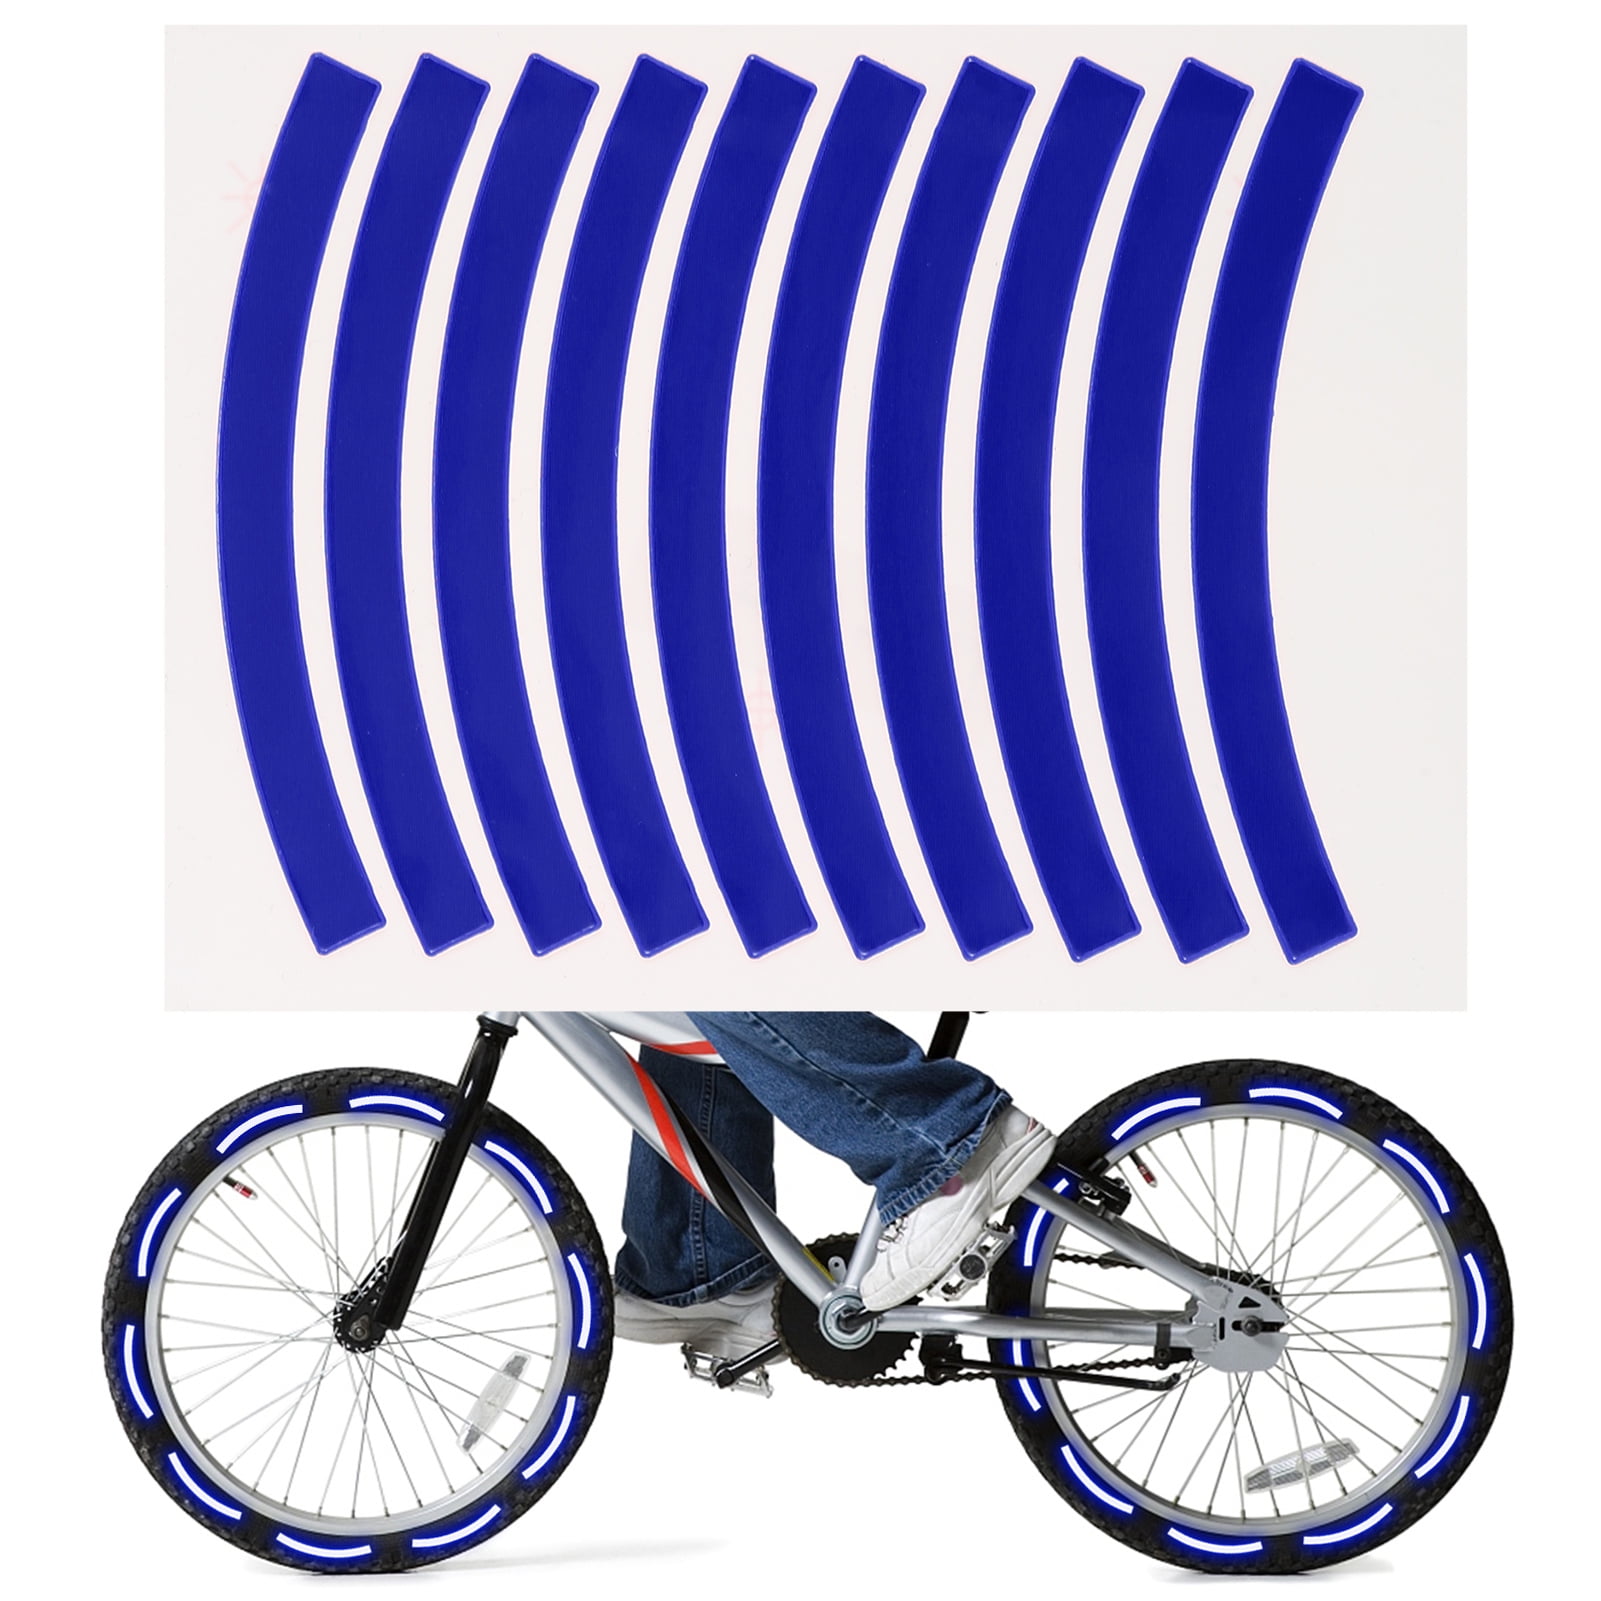 8M Cycling Warning Safety Bicycle Wheel Decor Reflective Tape Strip Sticker 